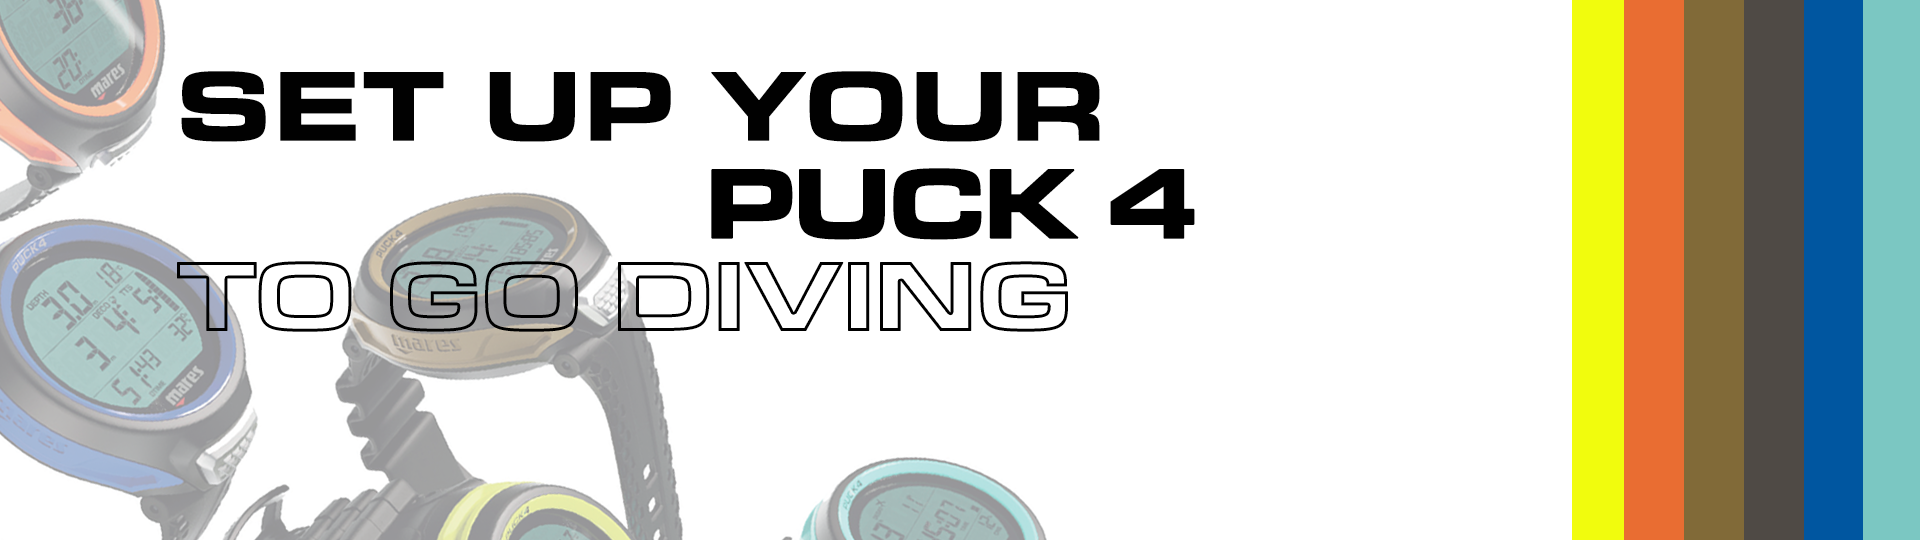 Set up your Puck 4 to go diving